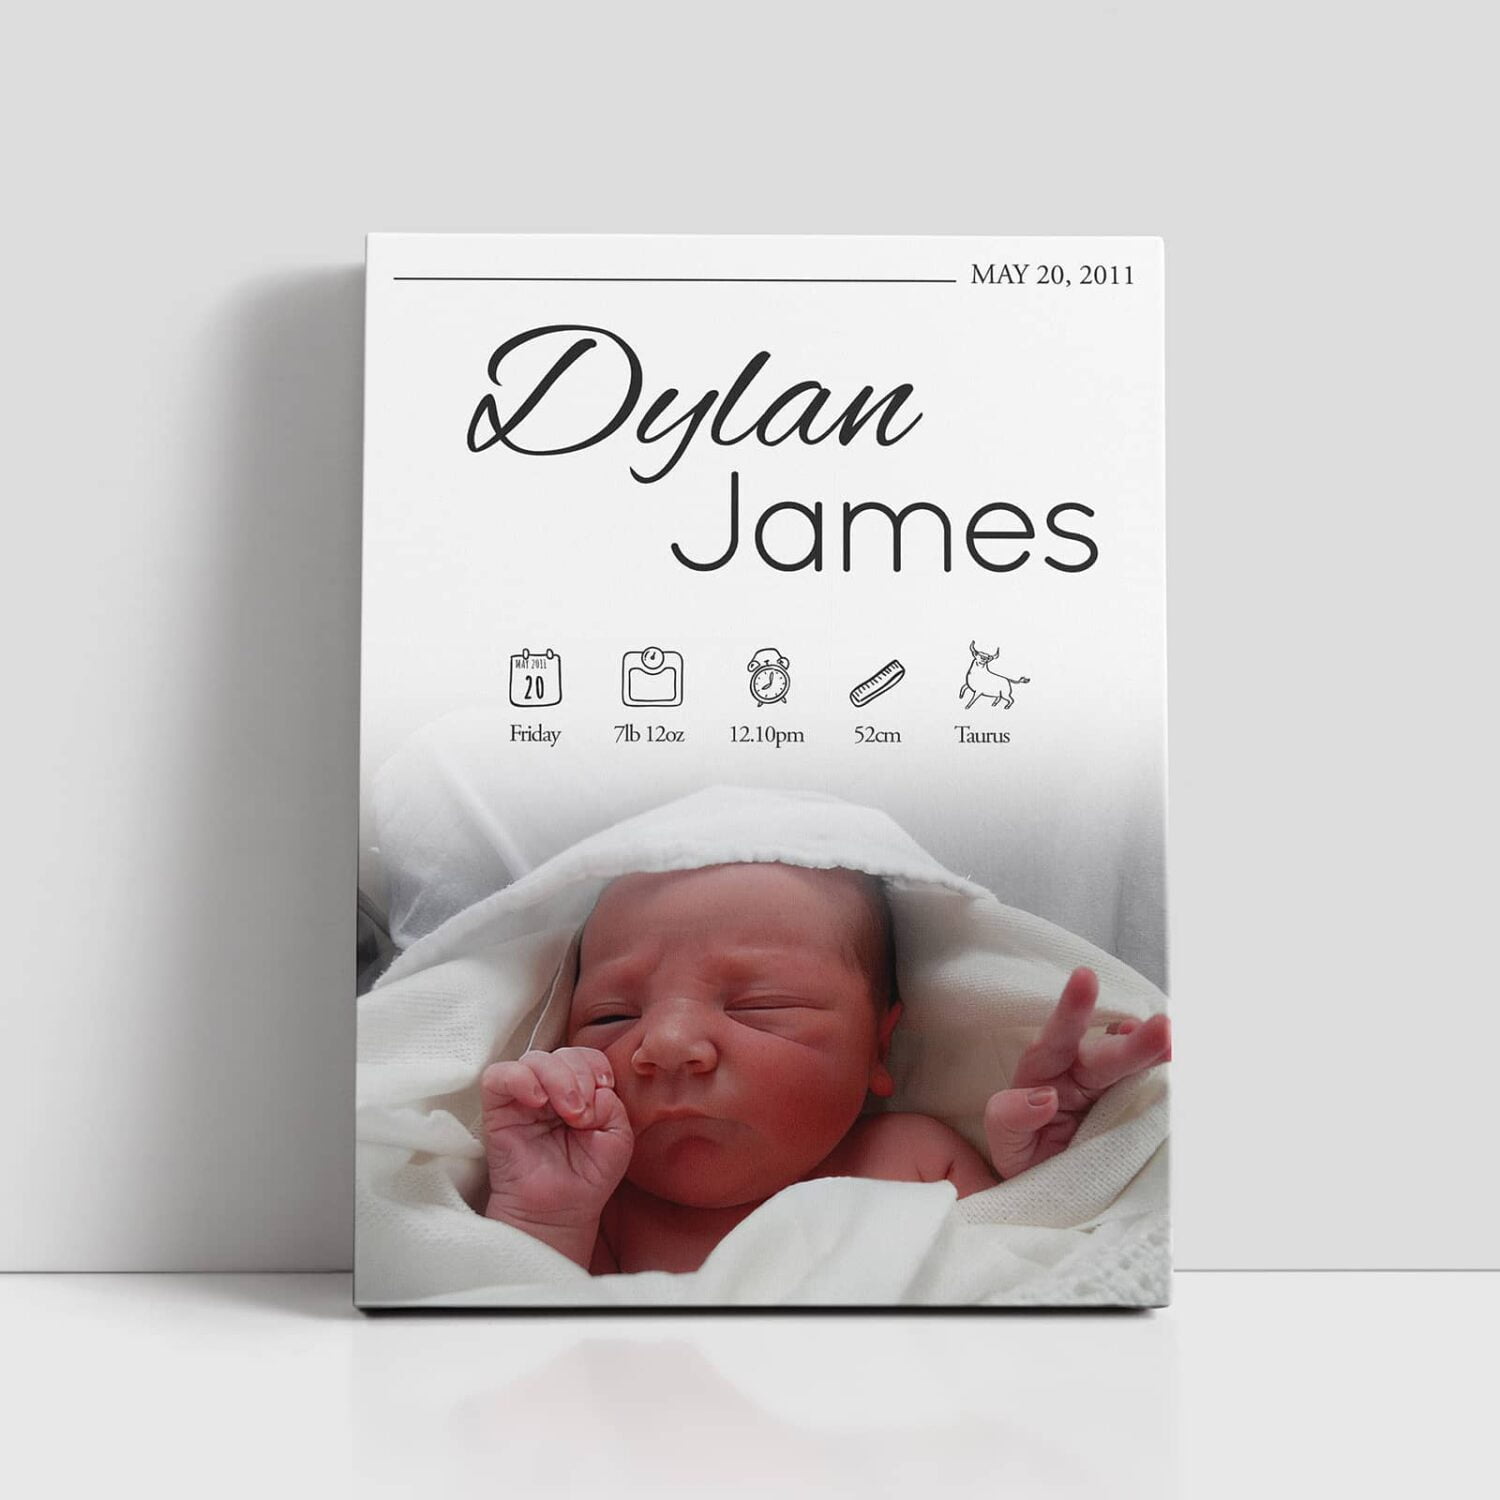 Personalised Newborn poster that features a photo of the baby as well as the time of birth, birth weight, time and birth date.